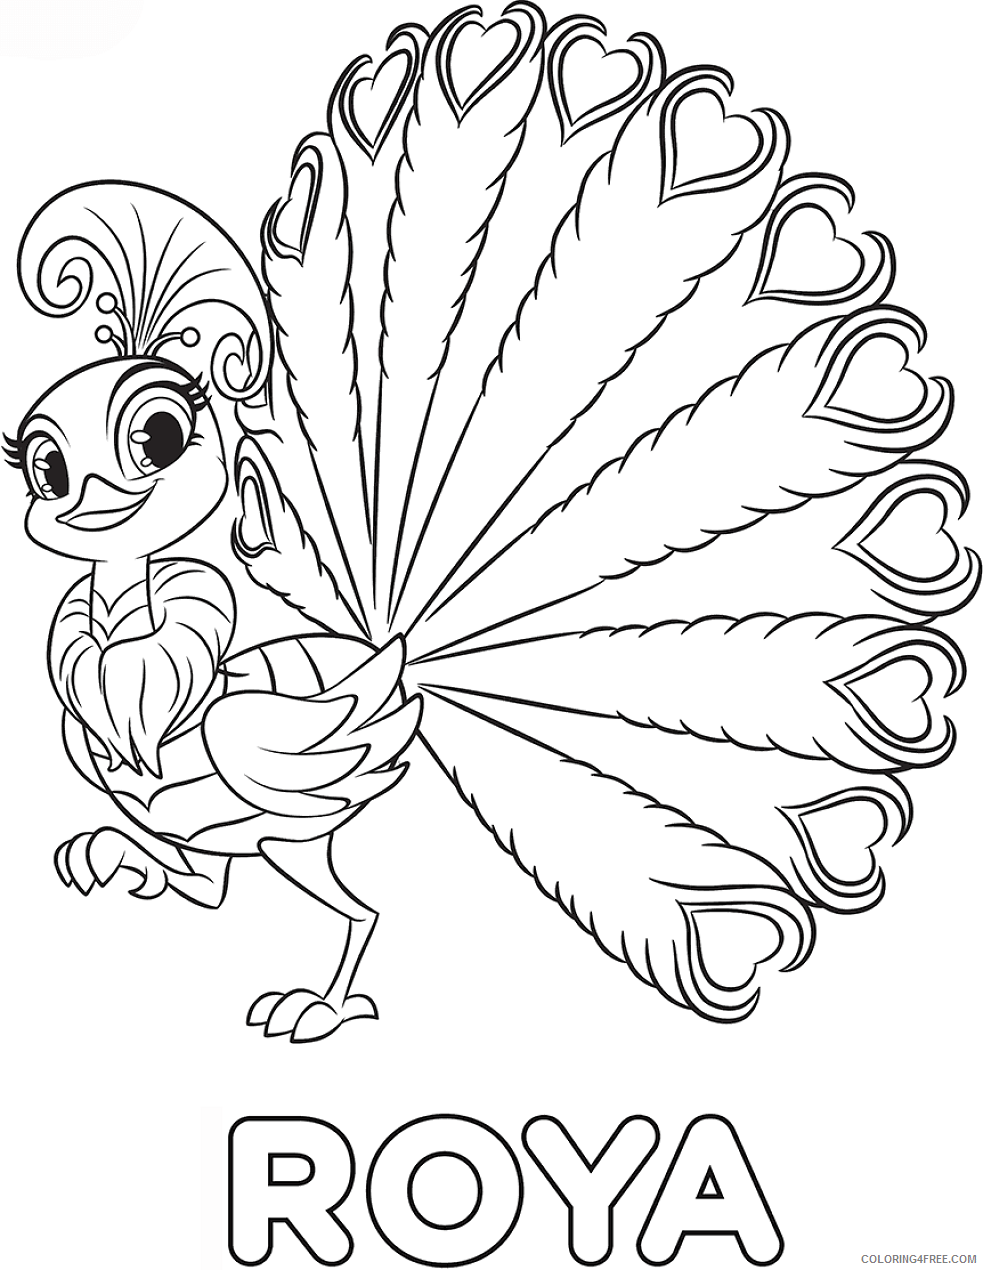 Shimmer and Shine Coloring Pages roya_in_shimmer_and_shine Printable 2021 5339 Coloring4free